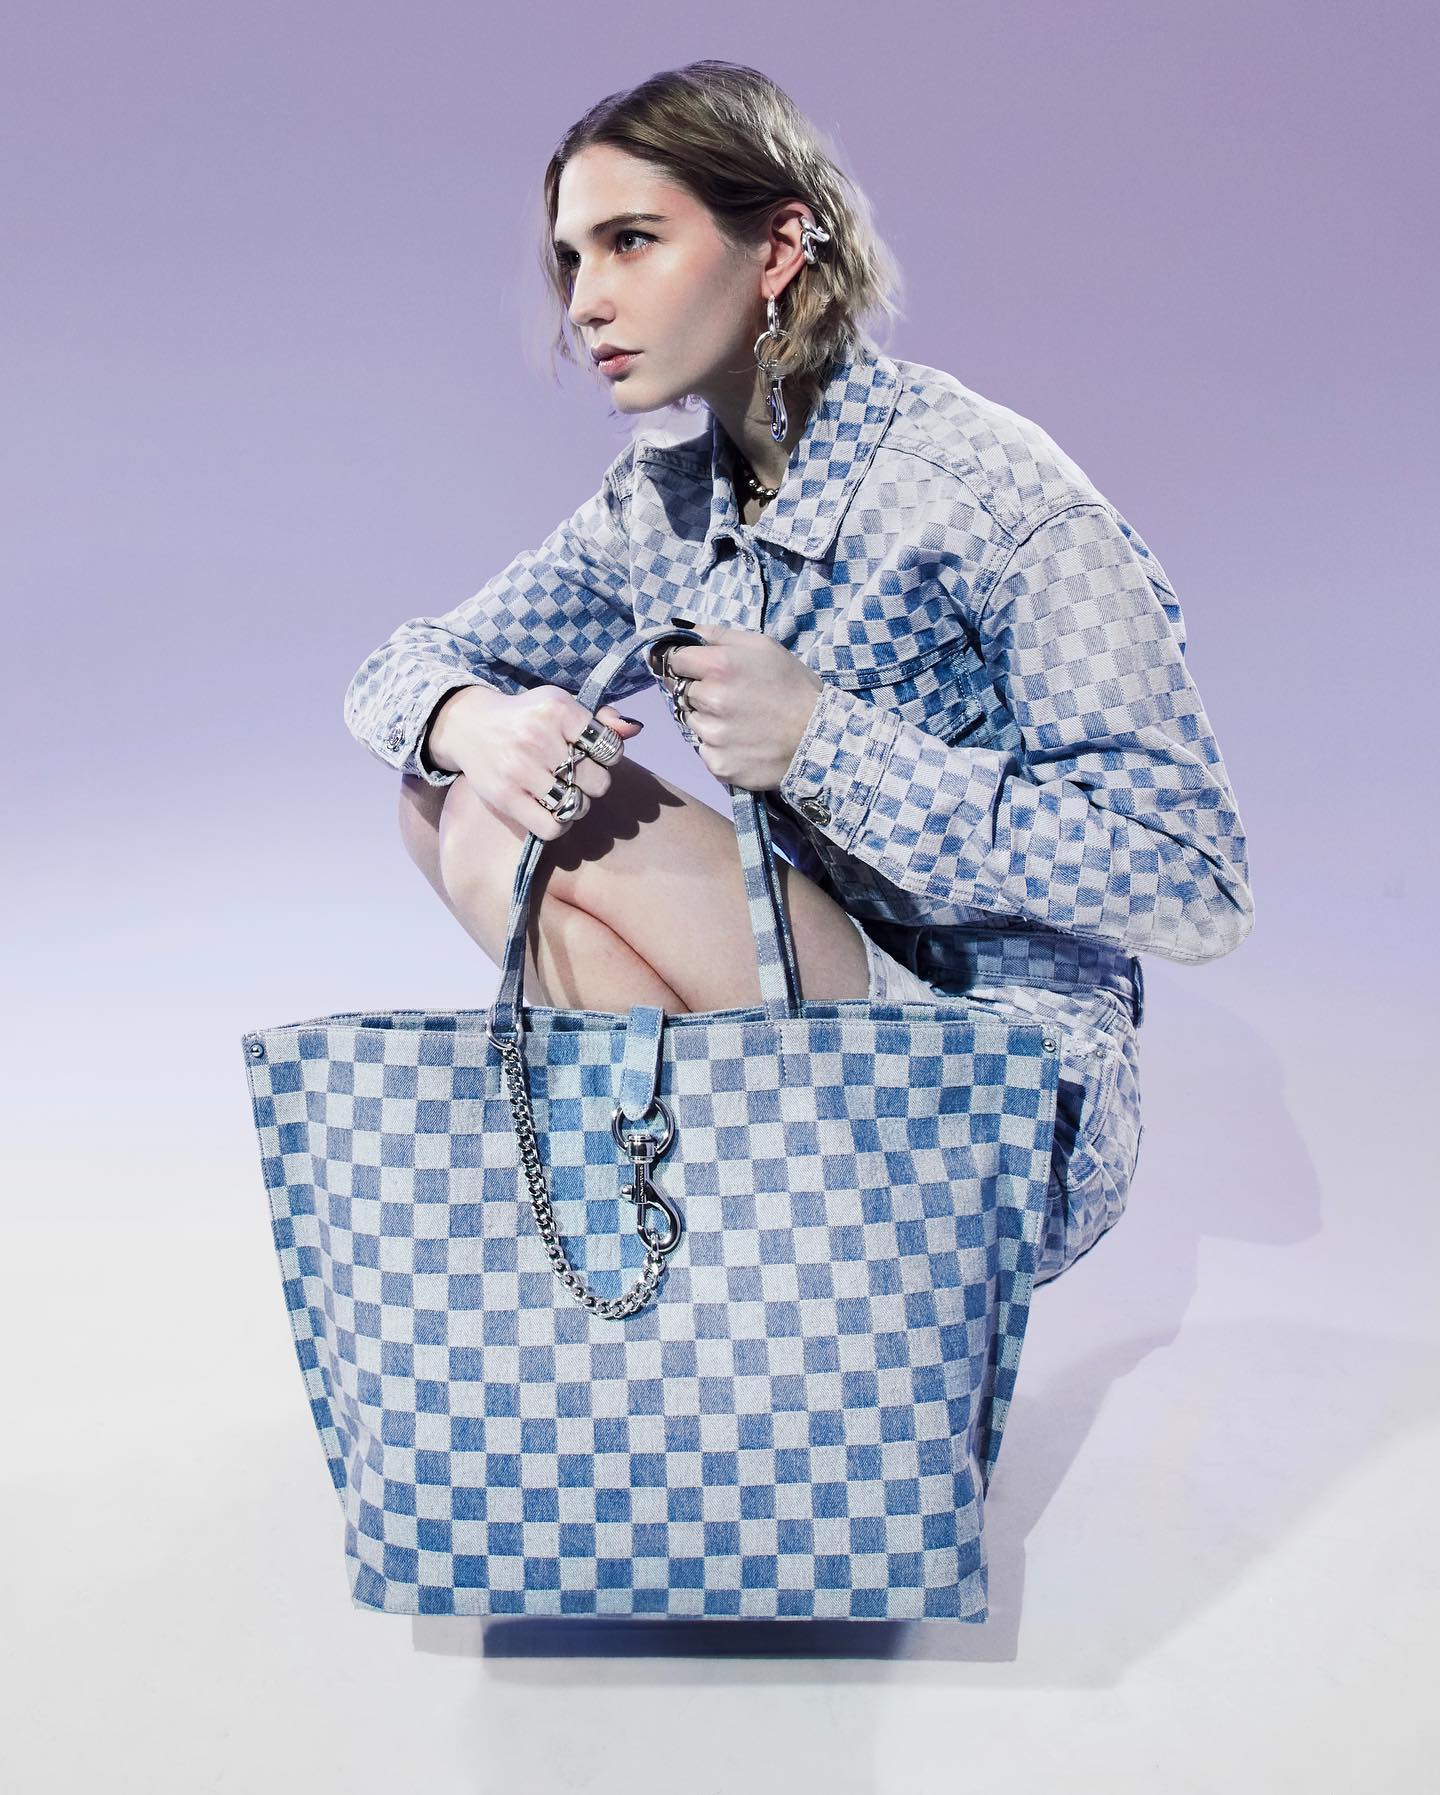 A woman is bending at the knee modeling a Rebecca Minkoff blue checkered bag. Her jacket matches the bag.